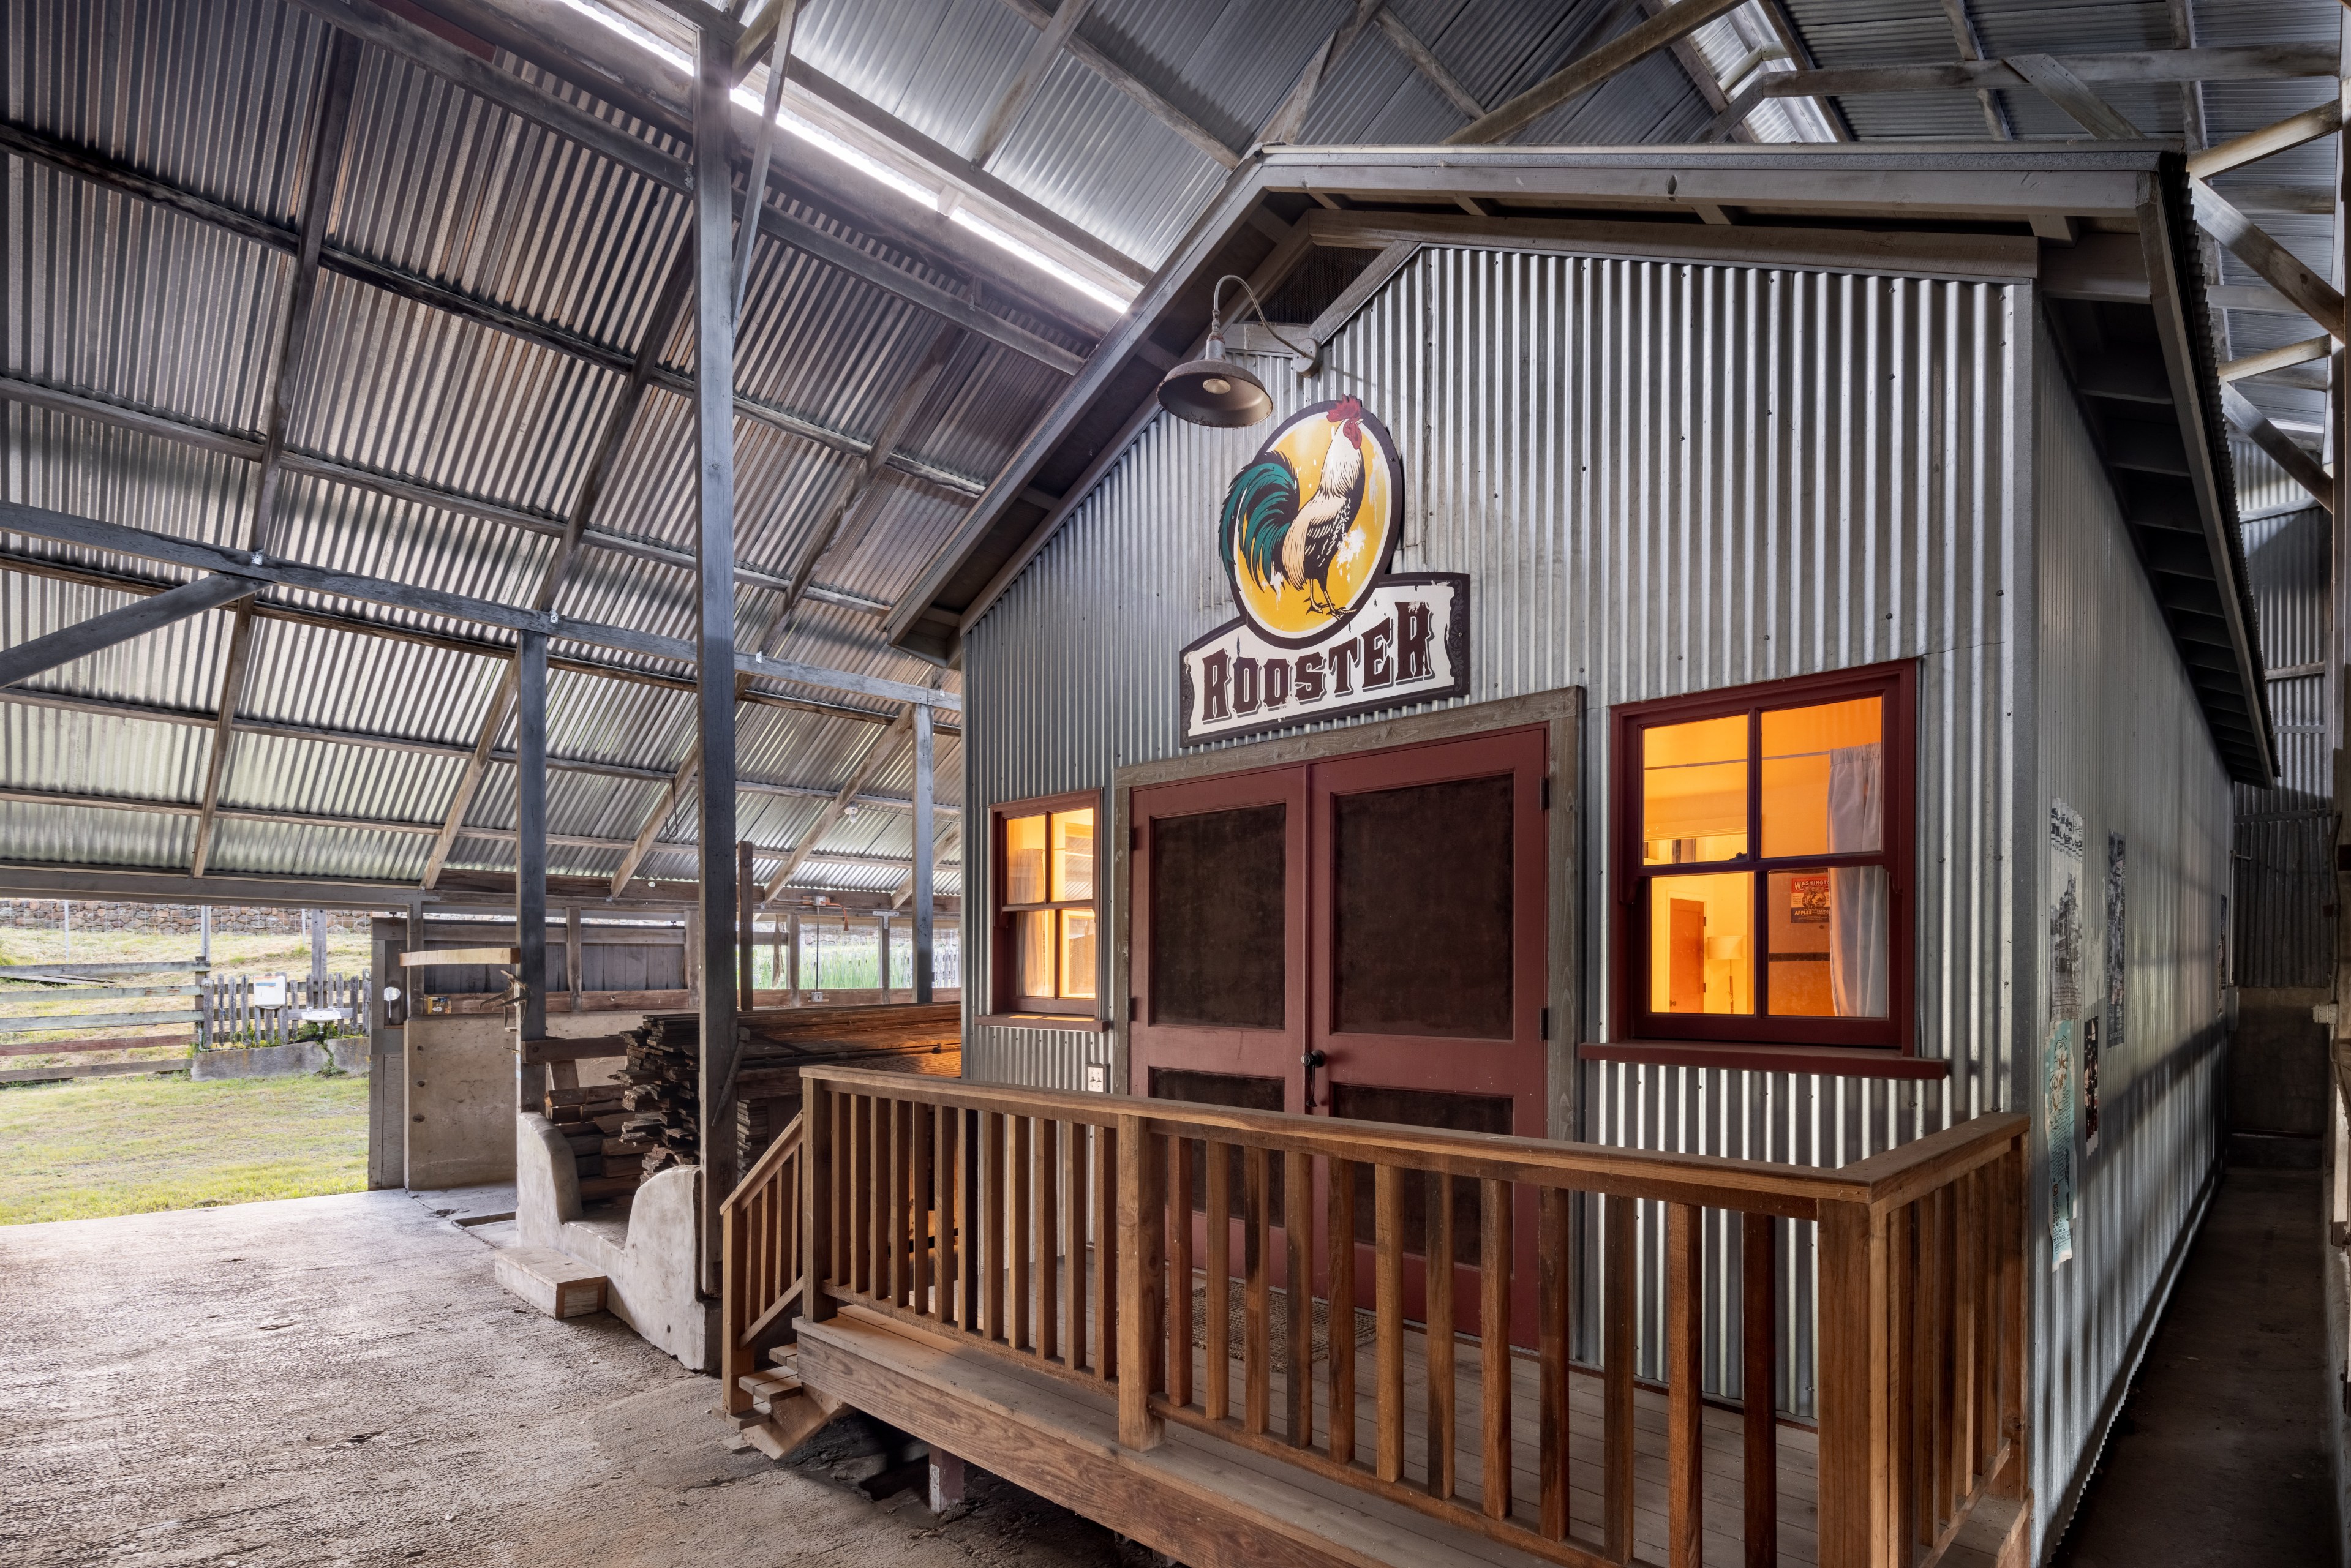 A rustic barn interior with a porch, corrugated metal walls, and a &quot;Rooster&quot; sign. Warm light pours from a window.